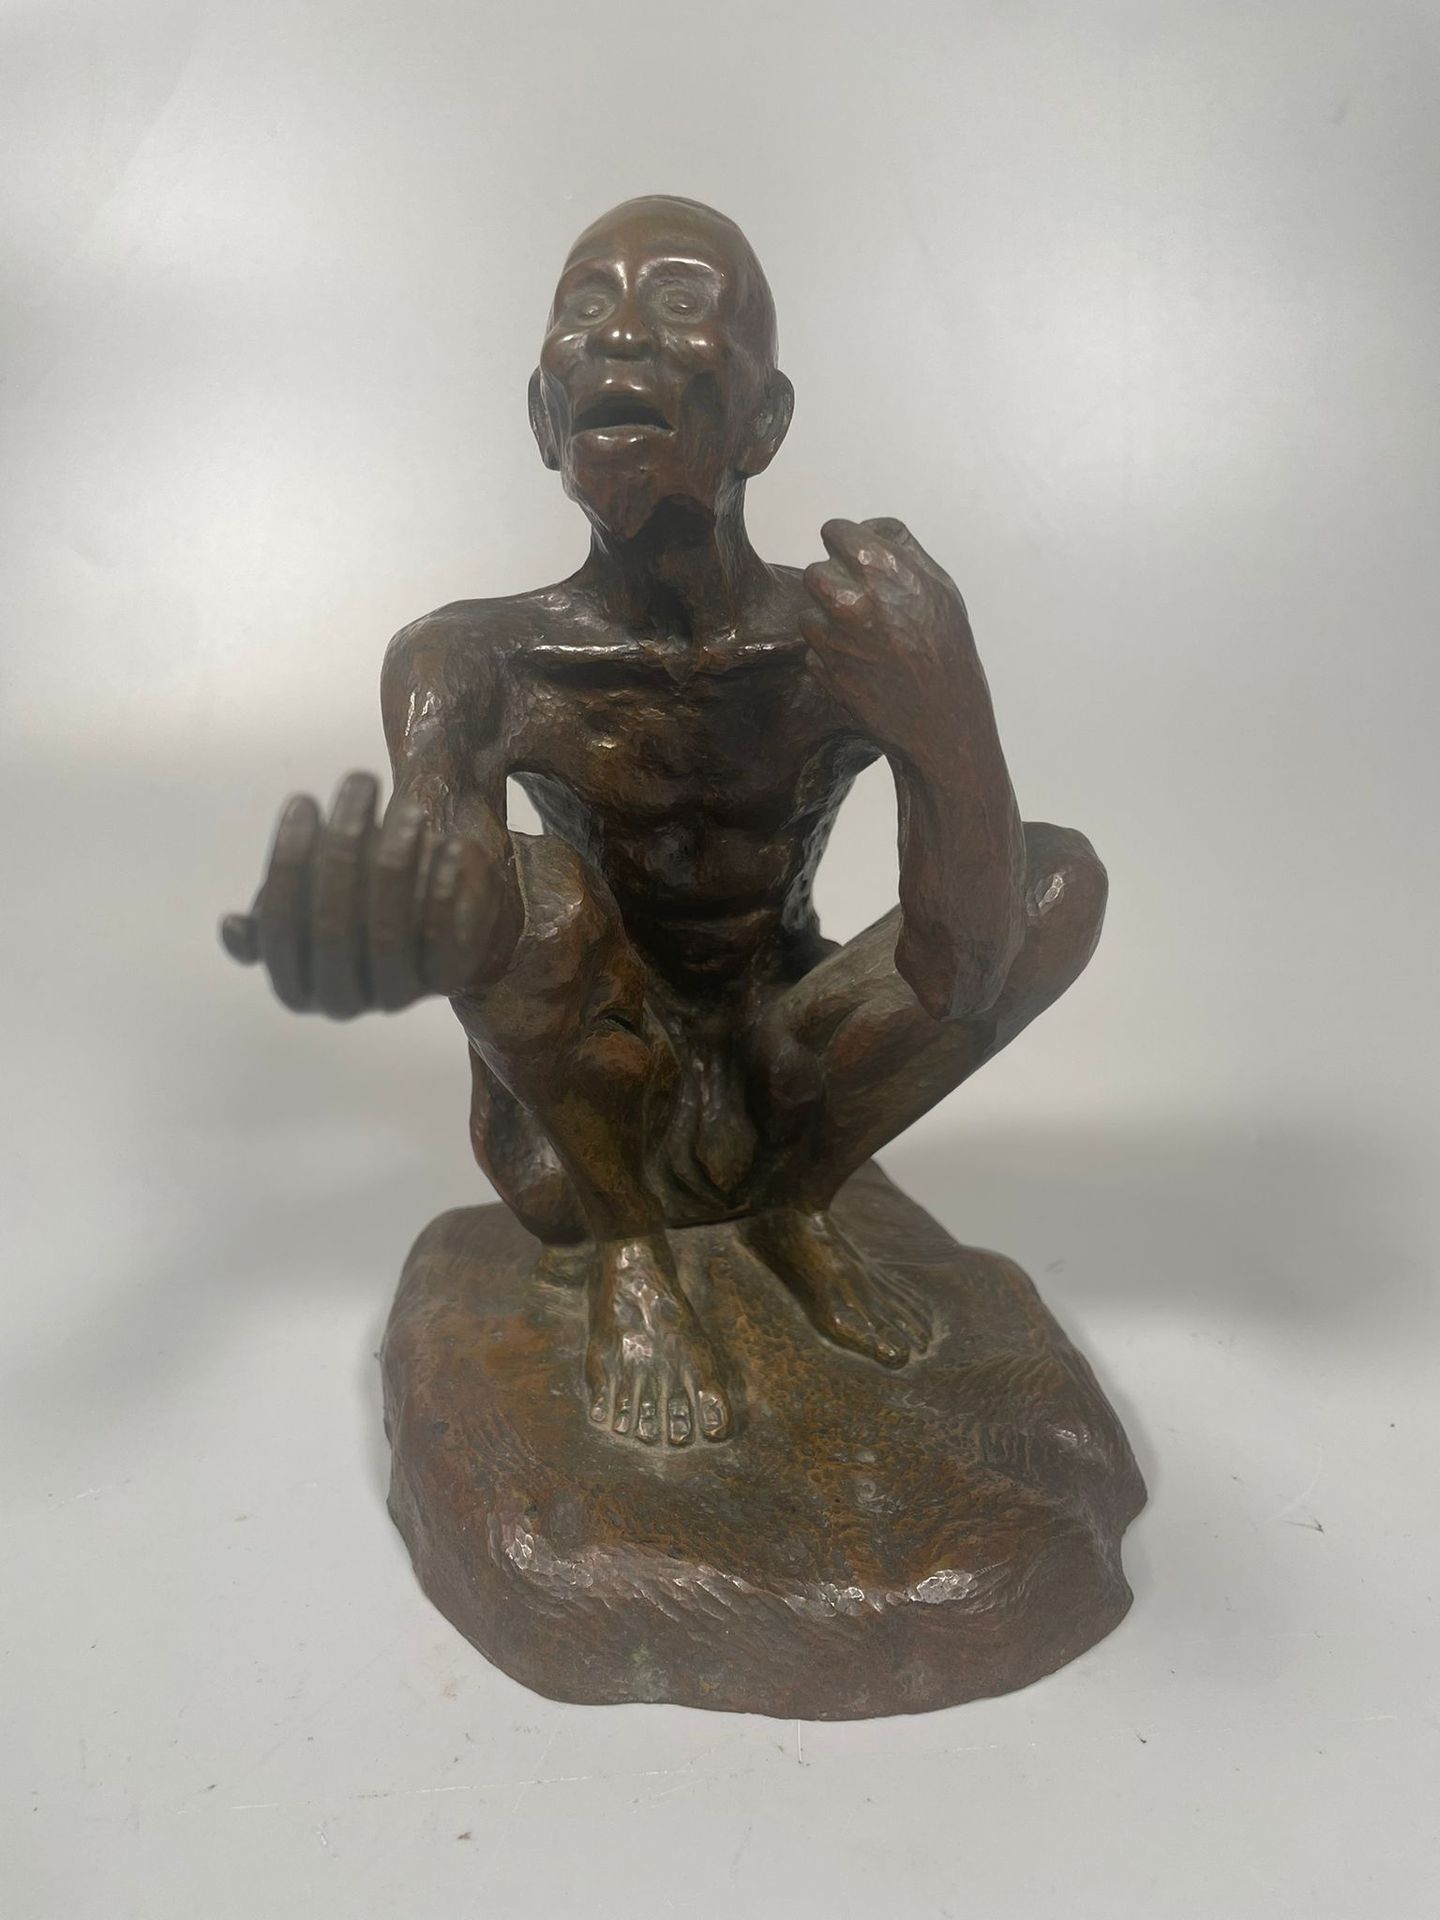 Null 20th century FRENCH SCHOOL
Squatting beggar 
Brown patina bronze signed "G.&hellip;